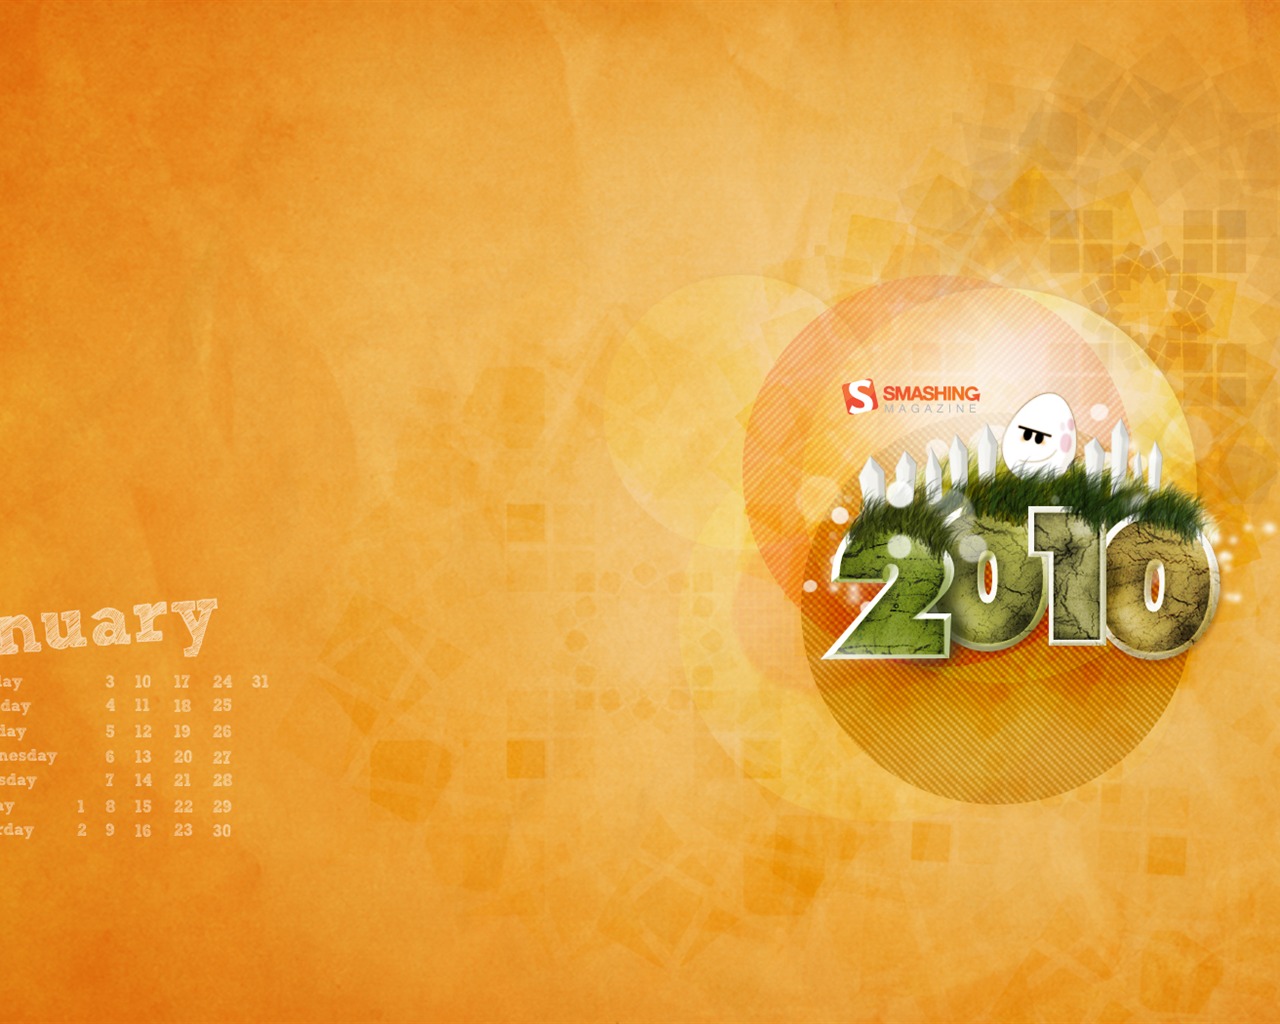 Microsoft Official Win7 Neujahr Wallpapers #8 - 1280x1024